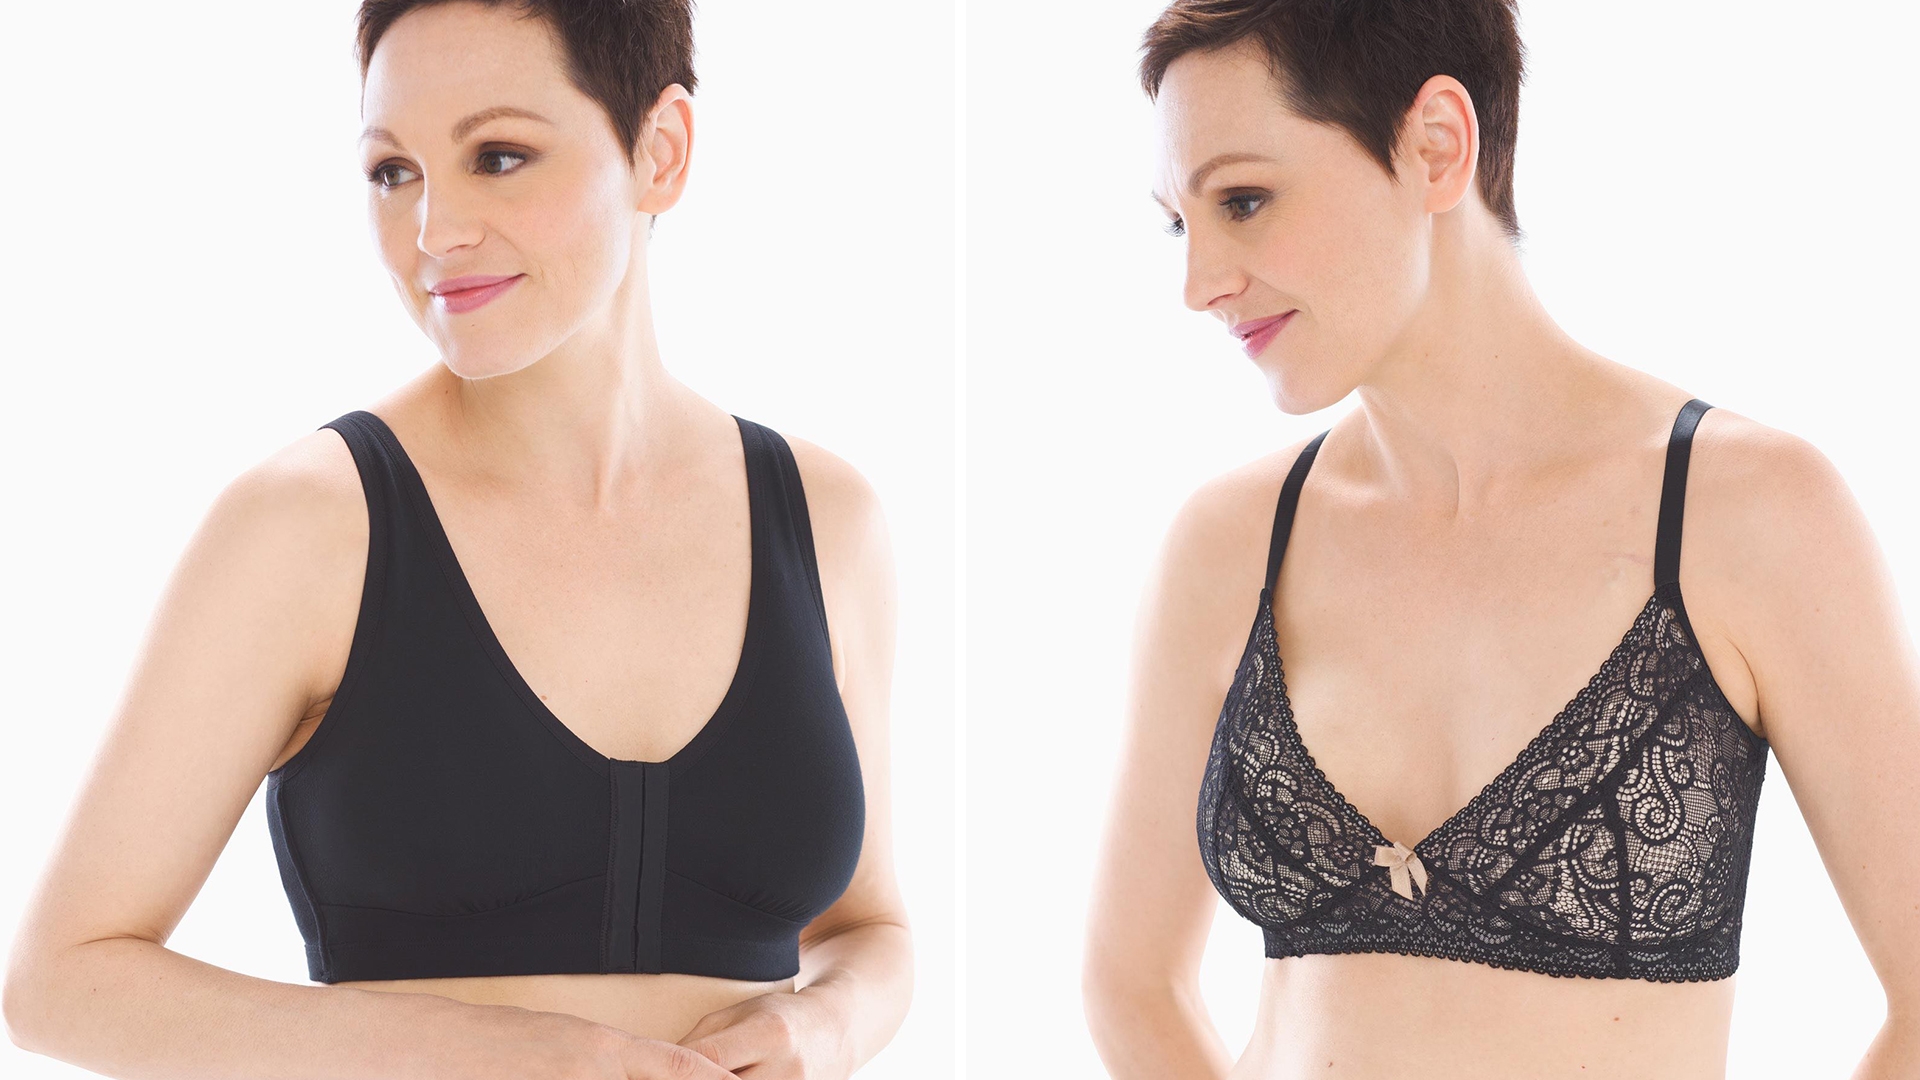 Soma<sup class=st-superscript>®</sup> women’s model wearing a black post-surgical bra and a black, lace post-surgical bra.